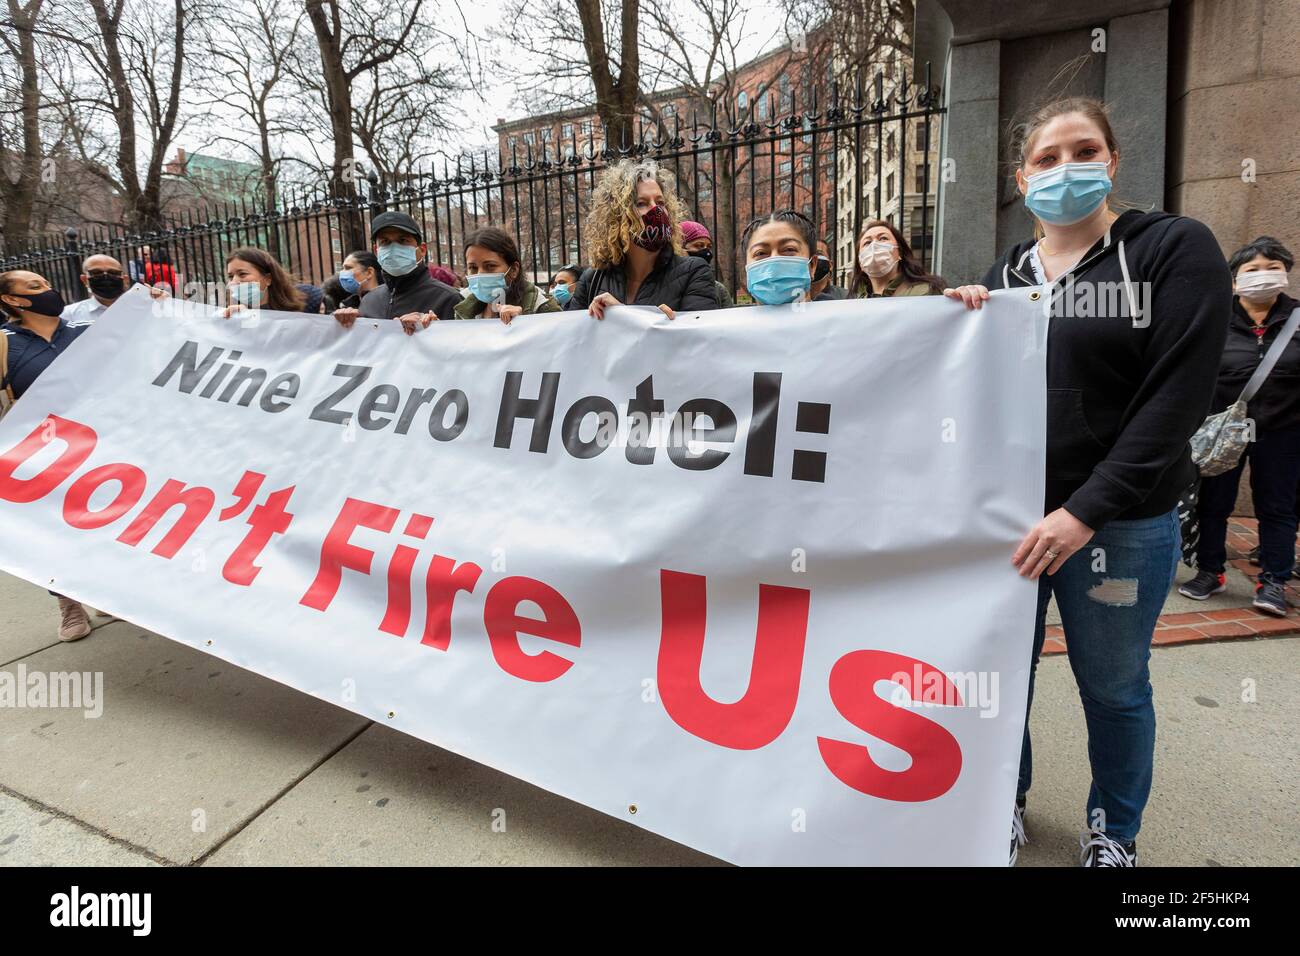 March 26, 2021. Boston, MA. Recently fired Nine Zero Hotel workers gathered at the hotel to demand their jobs back after Nine Zero Hotel fired 52 empl Stock Photo